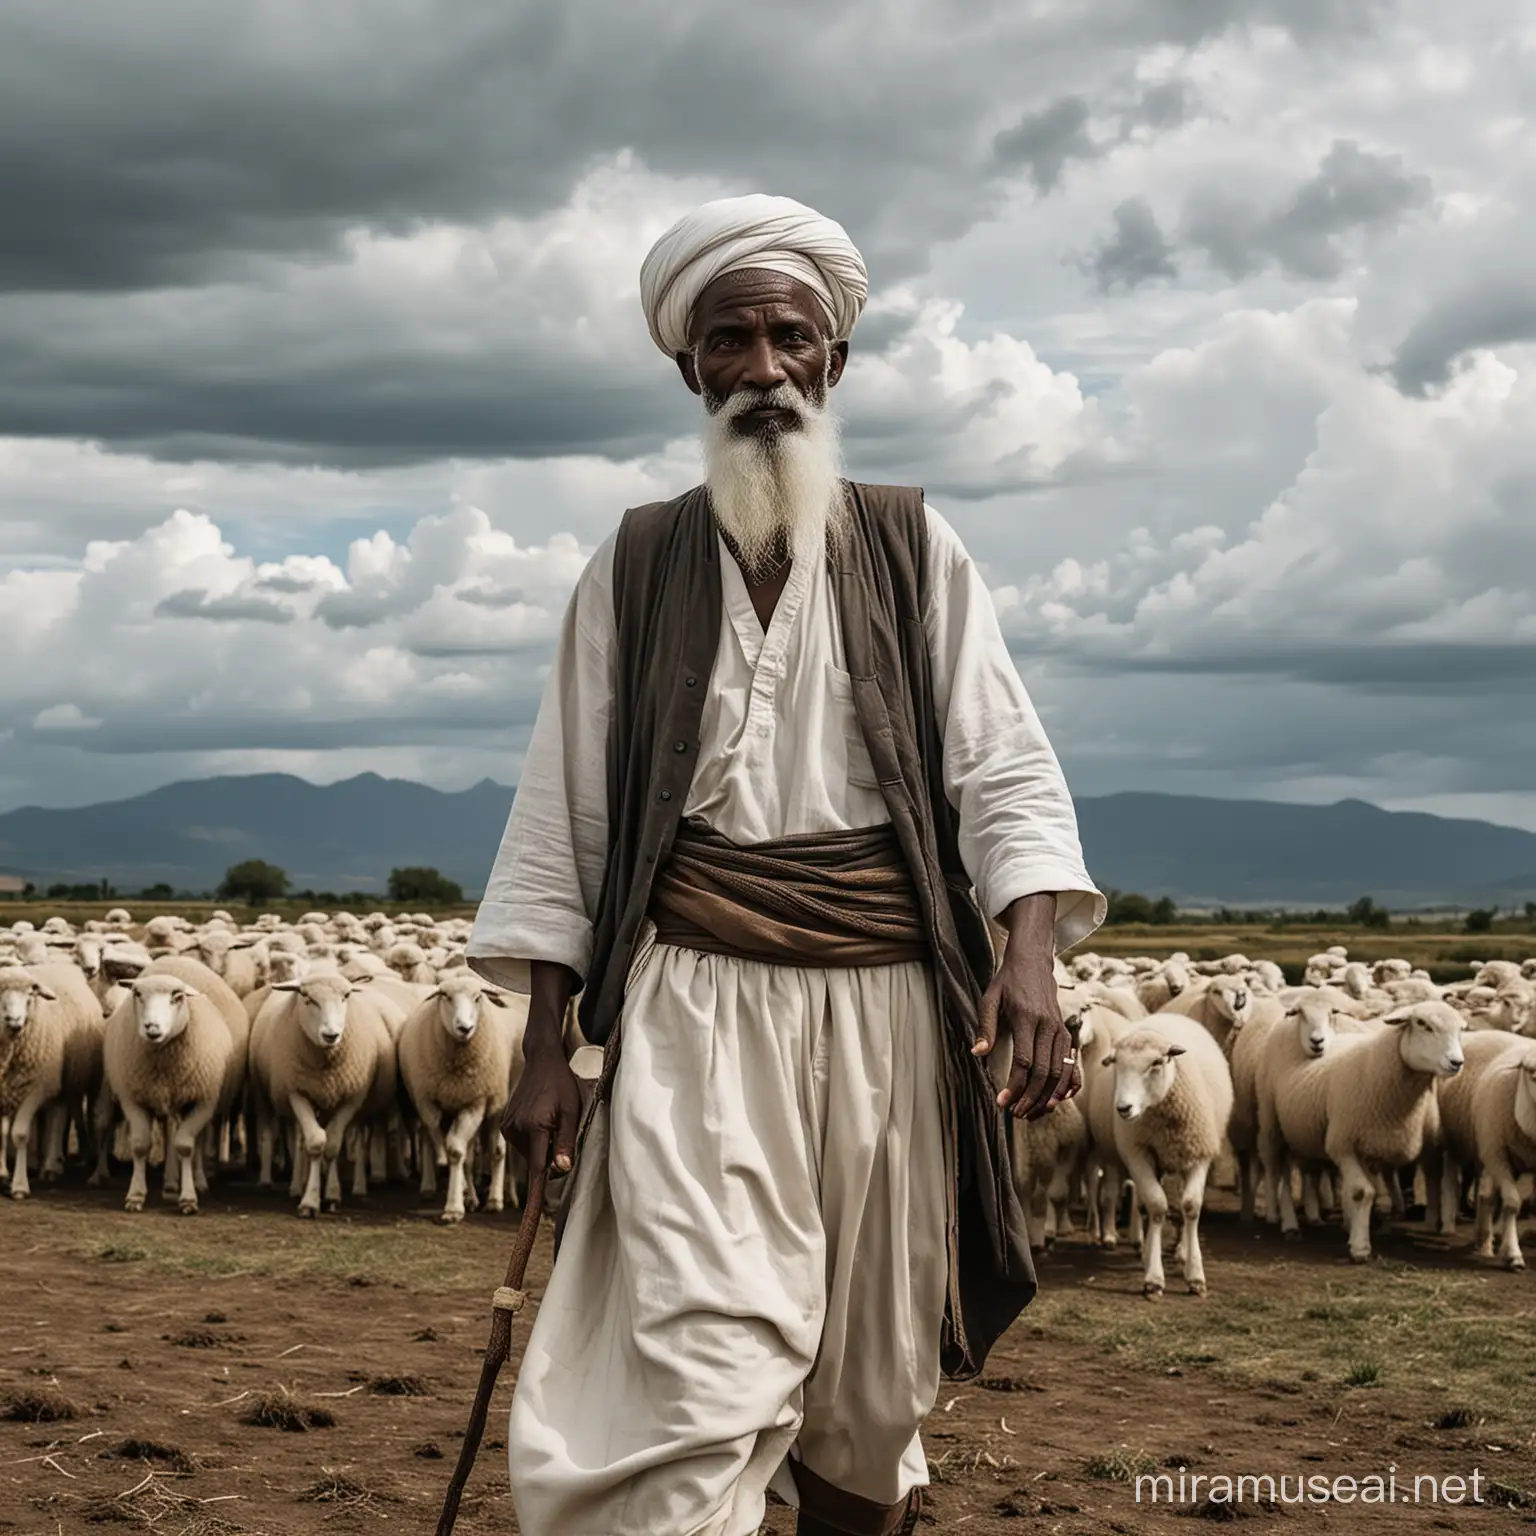 Elderly Nomad Farmer with Flock of Sheep under Cloudy Sky